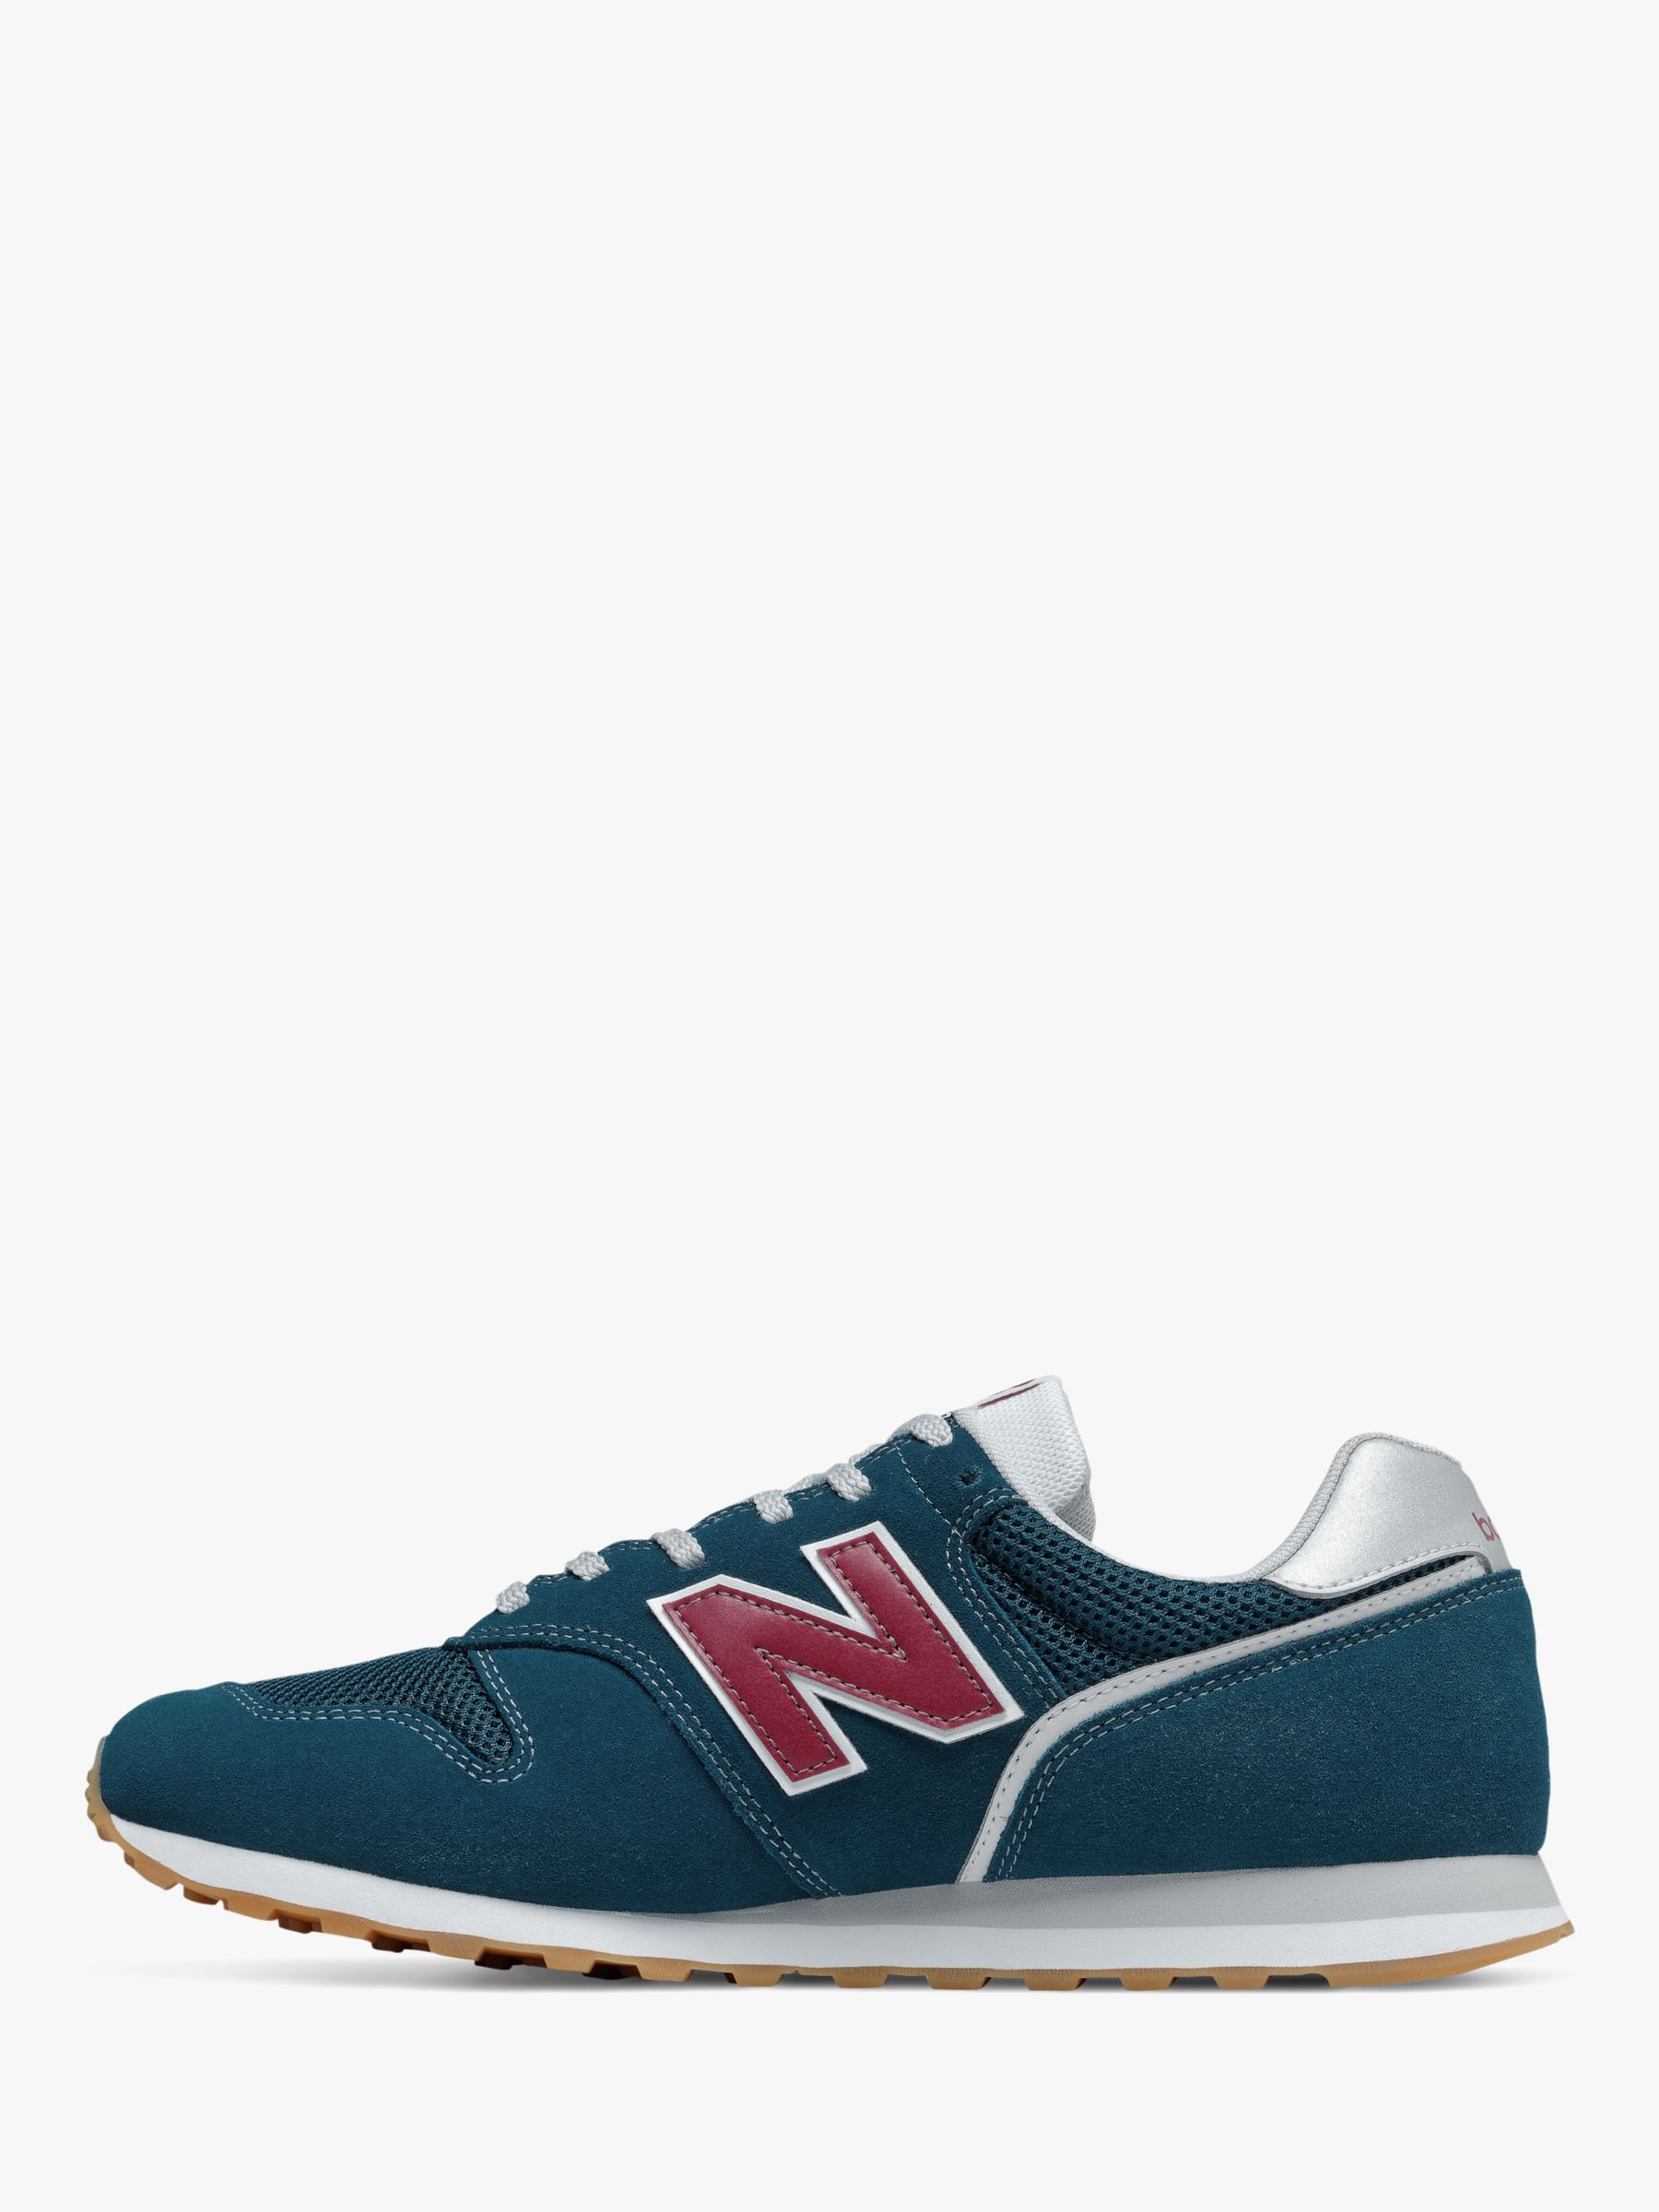 New Balance 373 V2 Trainers, Navy/Blue at John Lewis & Partners